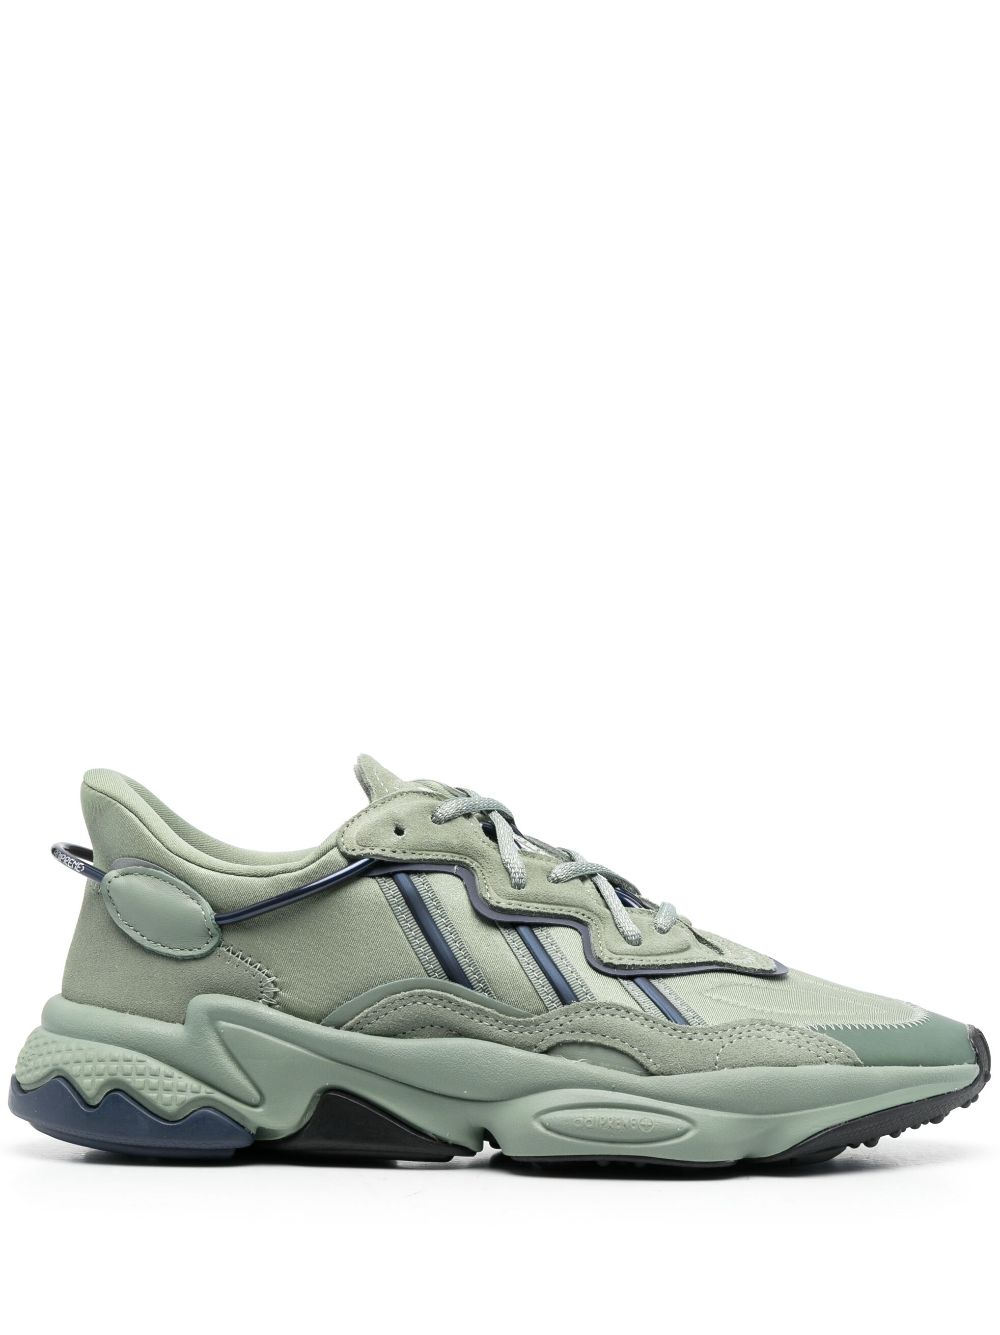 adidas Ozweego low-top sneakers - Green von adidas